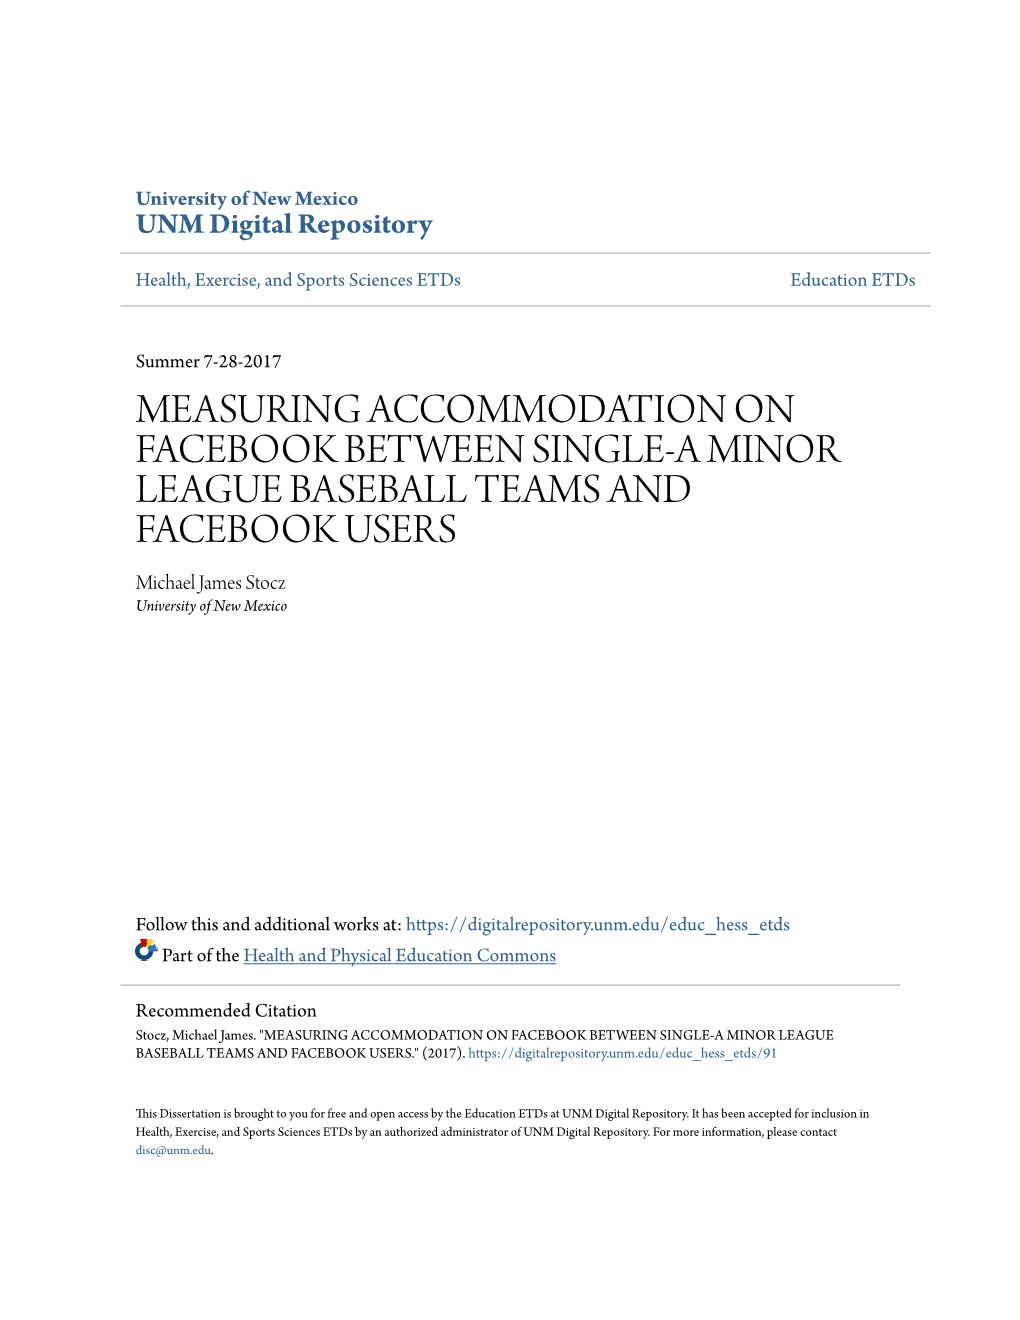 MEASURING ACCOMMODATION on FACEBOOK BETWEEN SINGLE-A MINOR LEAGUE BASEBALL TEAMS and FACEBOOK USERS Michael James Stocz University of New Mexico